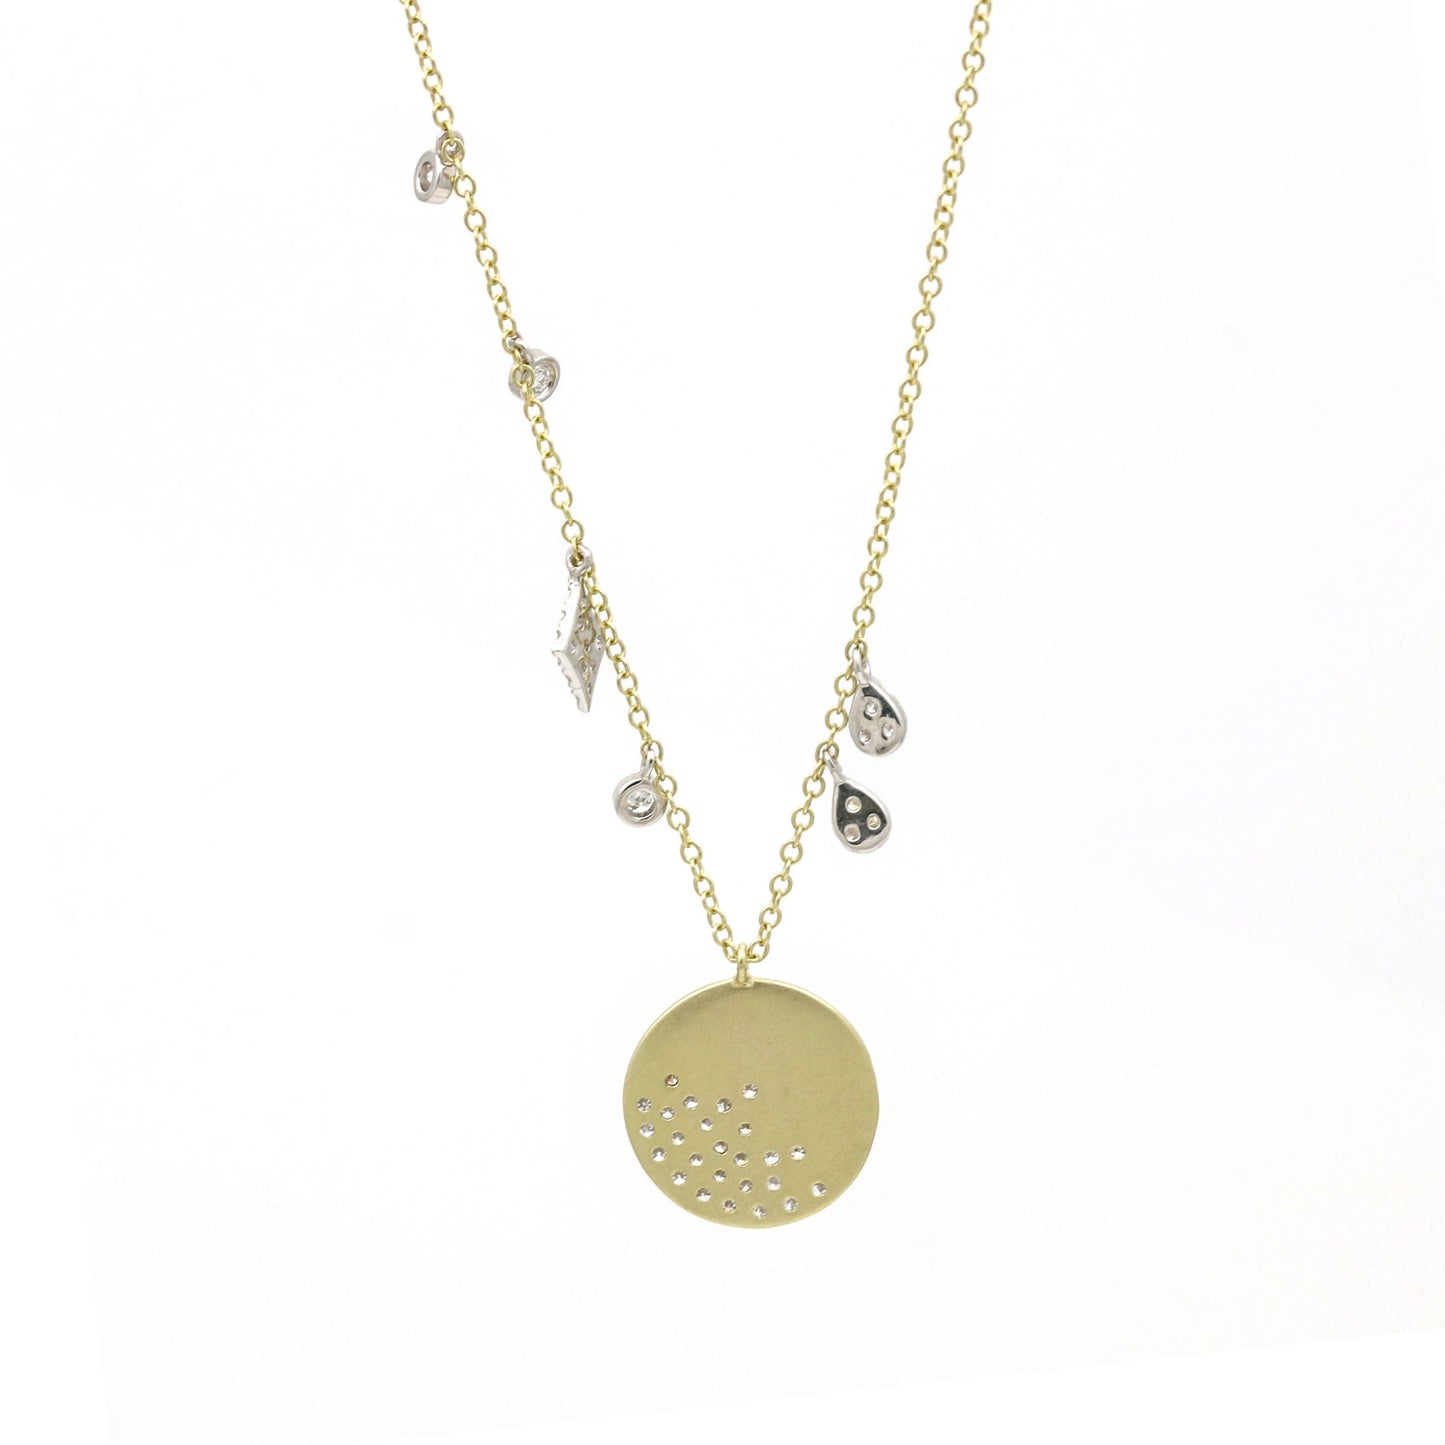 Meira T Brushed 14k Gold and Diamonds Necklace with Dangling Charms - 31 Jewels Inc.